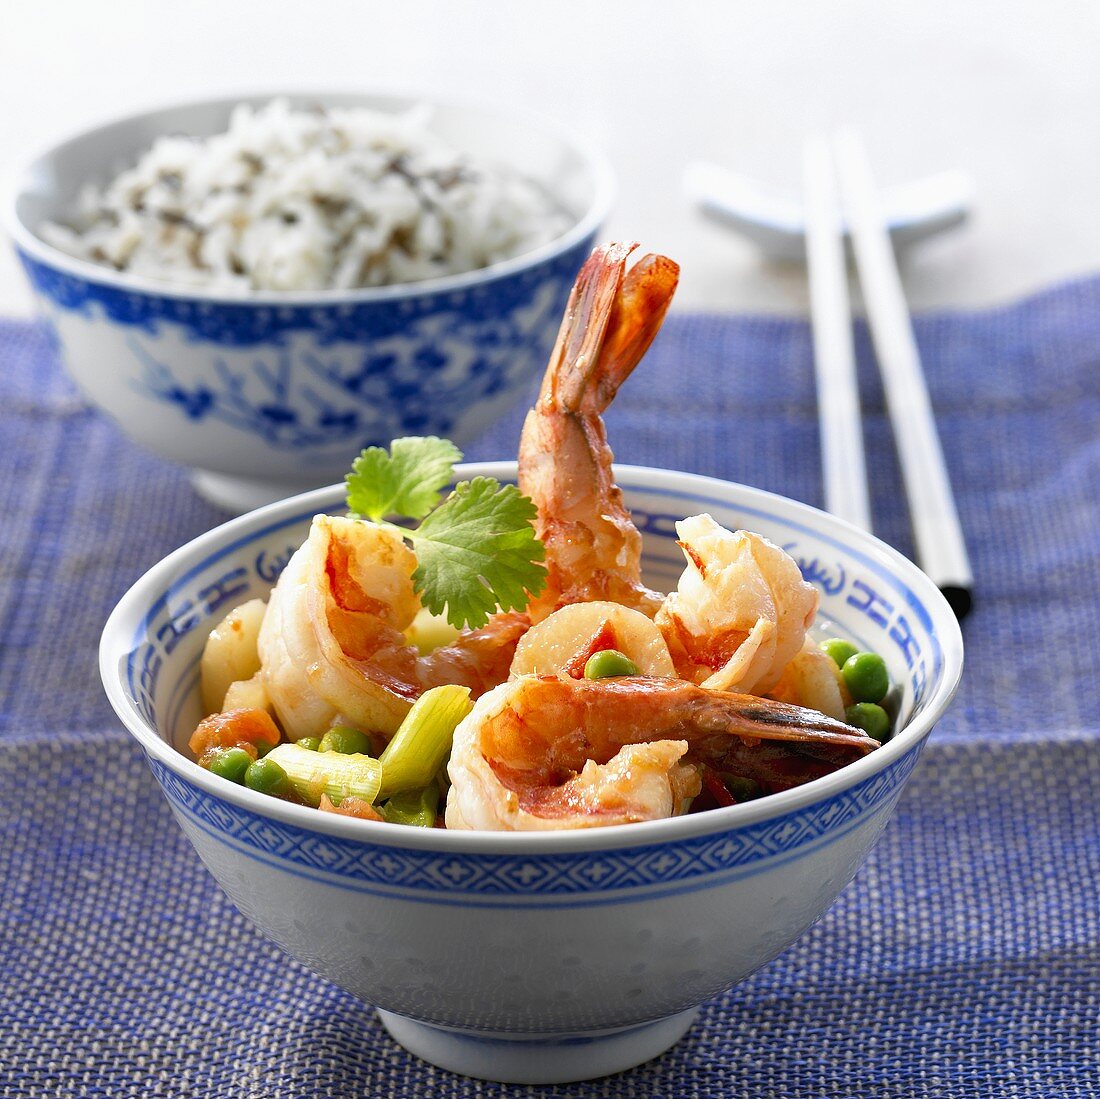 Fried shrimps with vegetables and a bowl of rice (China)